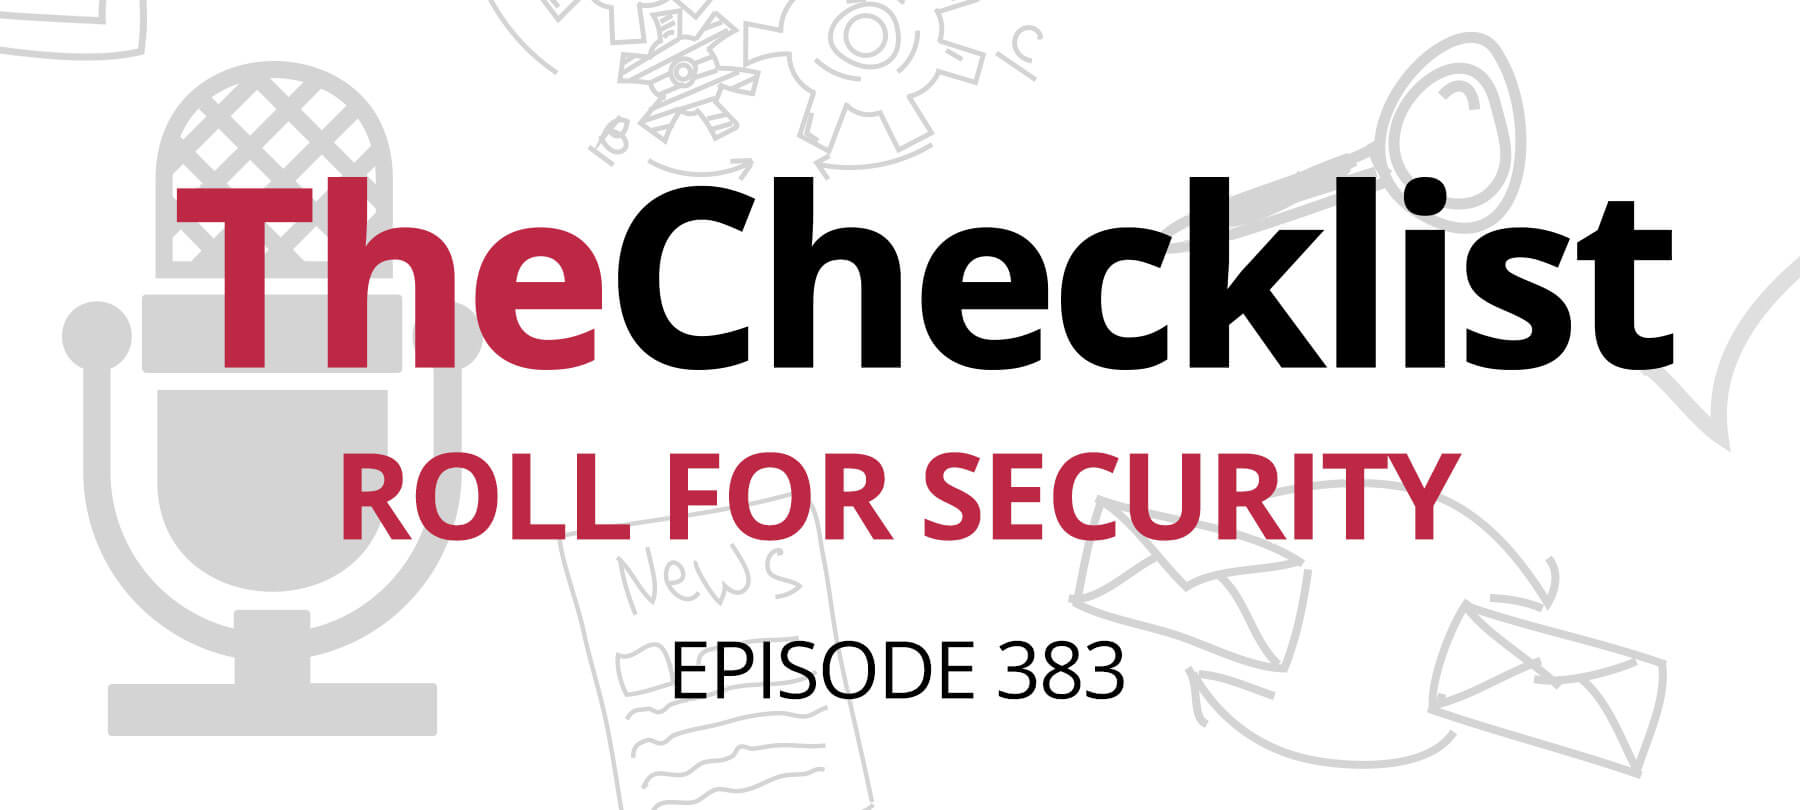 Checklist 381 header image: Roll For Security, written in red text